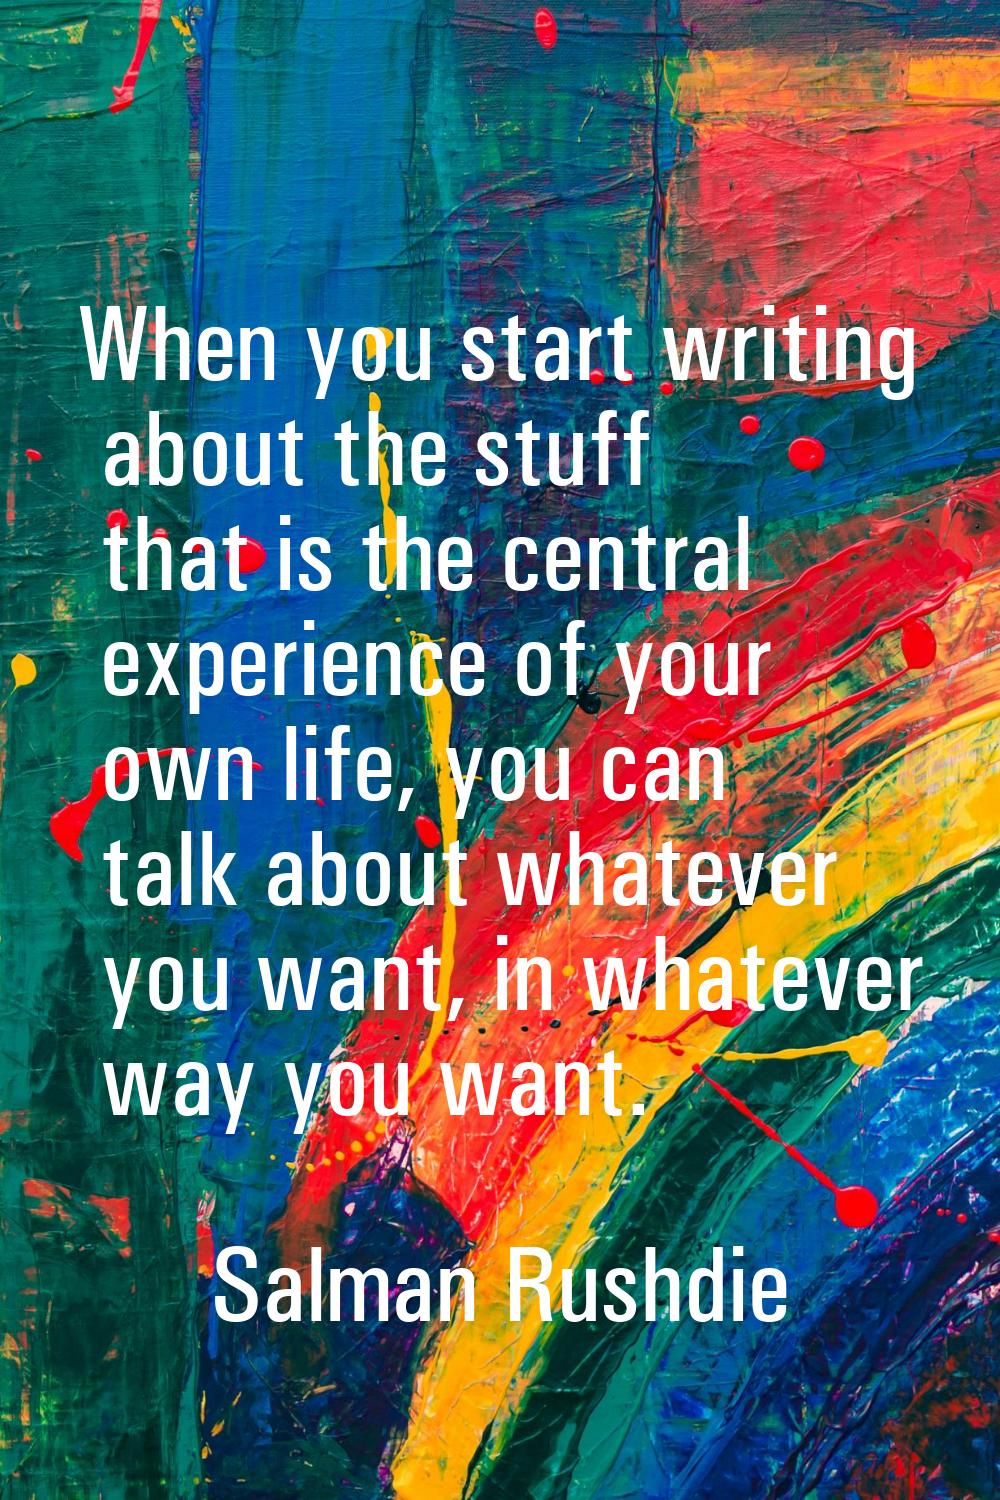 When you start writing about the stuff that is the central experience of your own life, you can tal